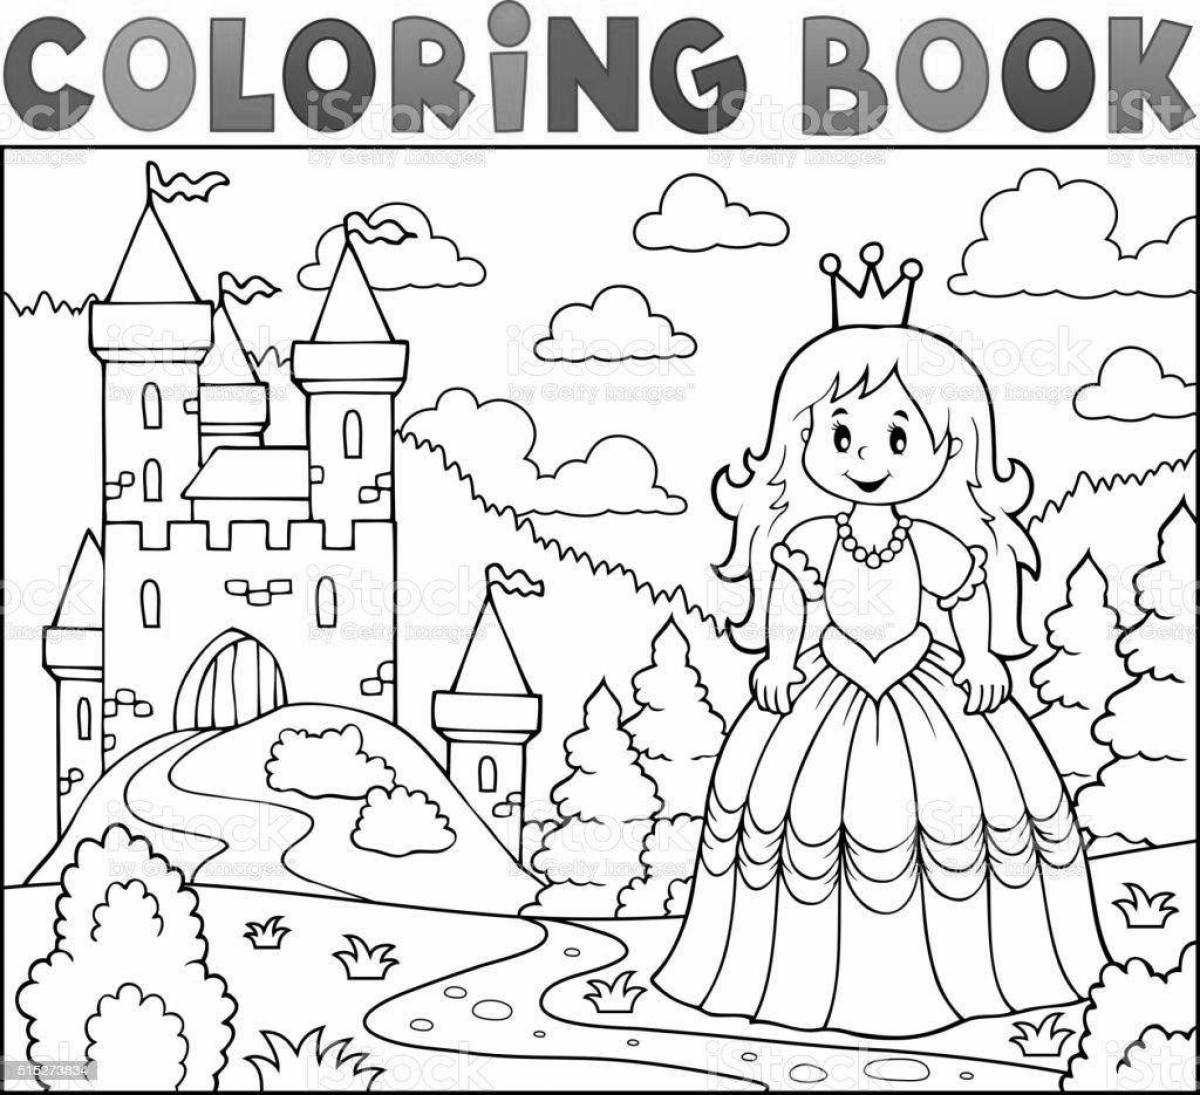 Gorgeous castle coloring book for girls